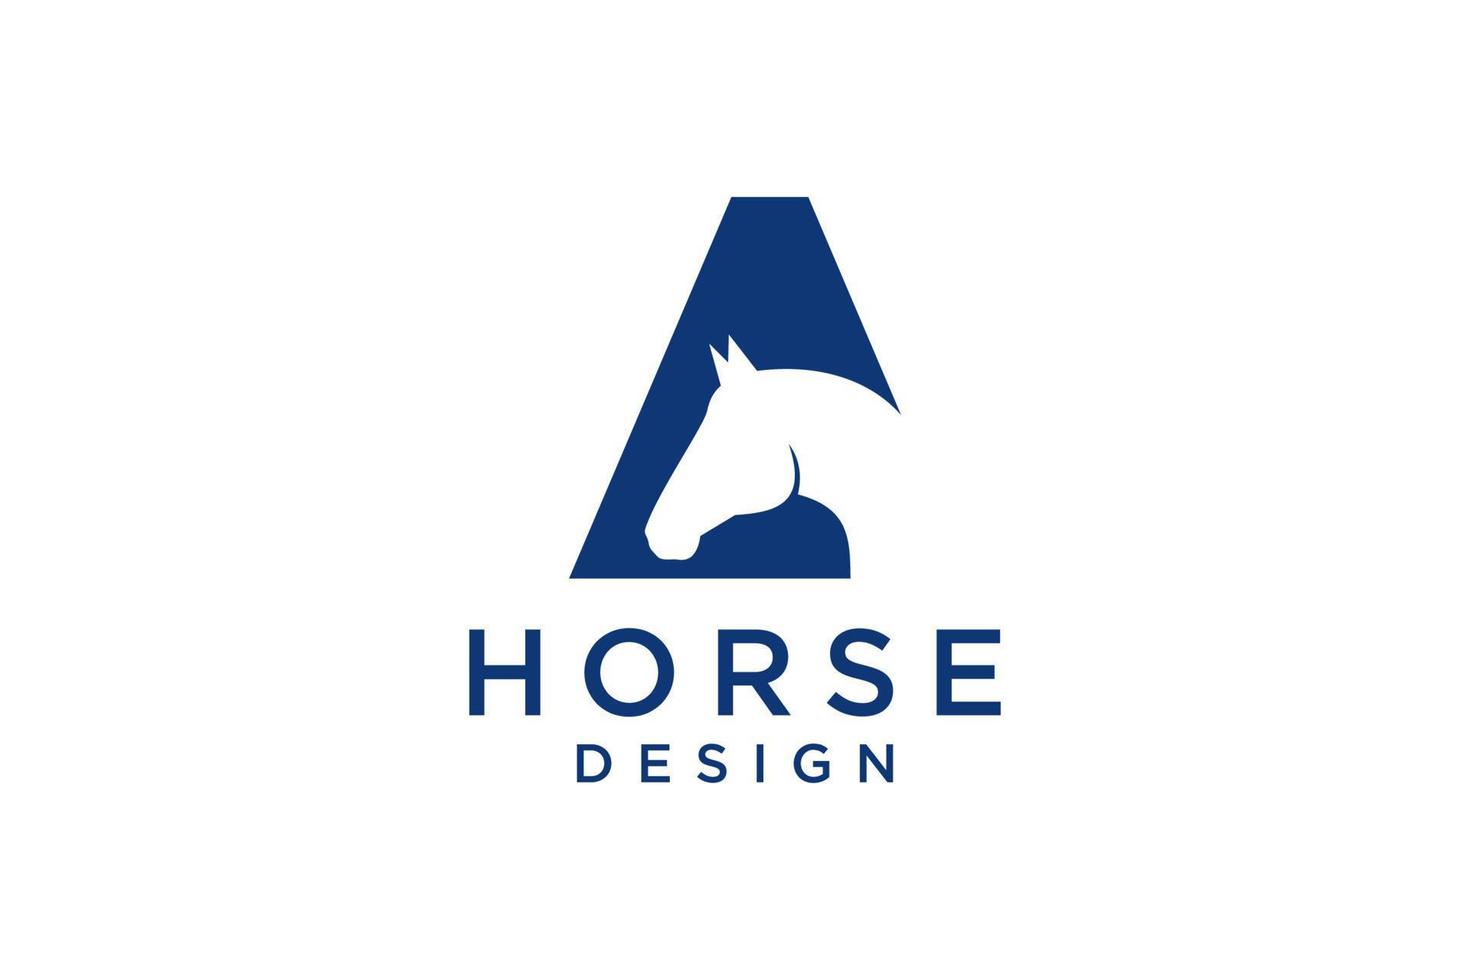 The logo design with the initial letter A is combined with a modern and professional horse head symbol vector